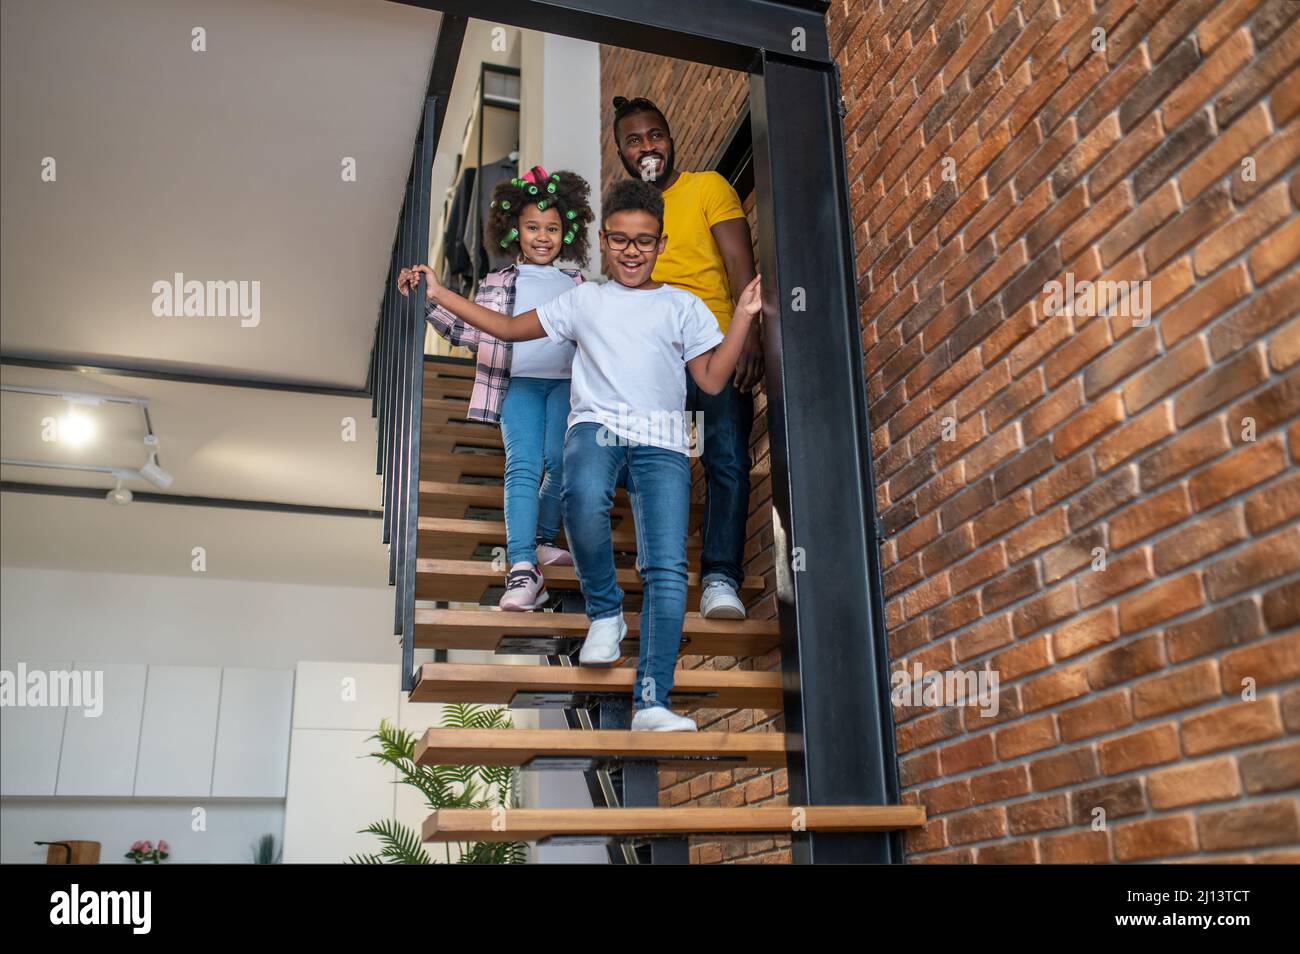 Boy girl and man going down stairs at home Stock Photo